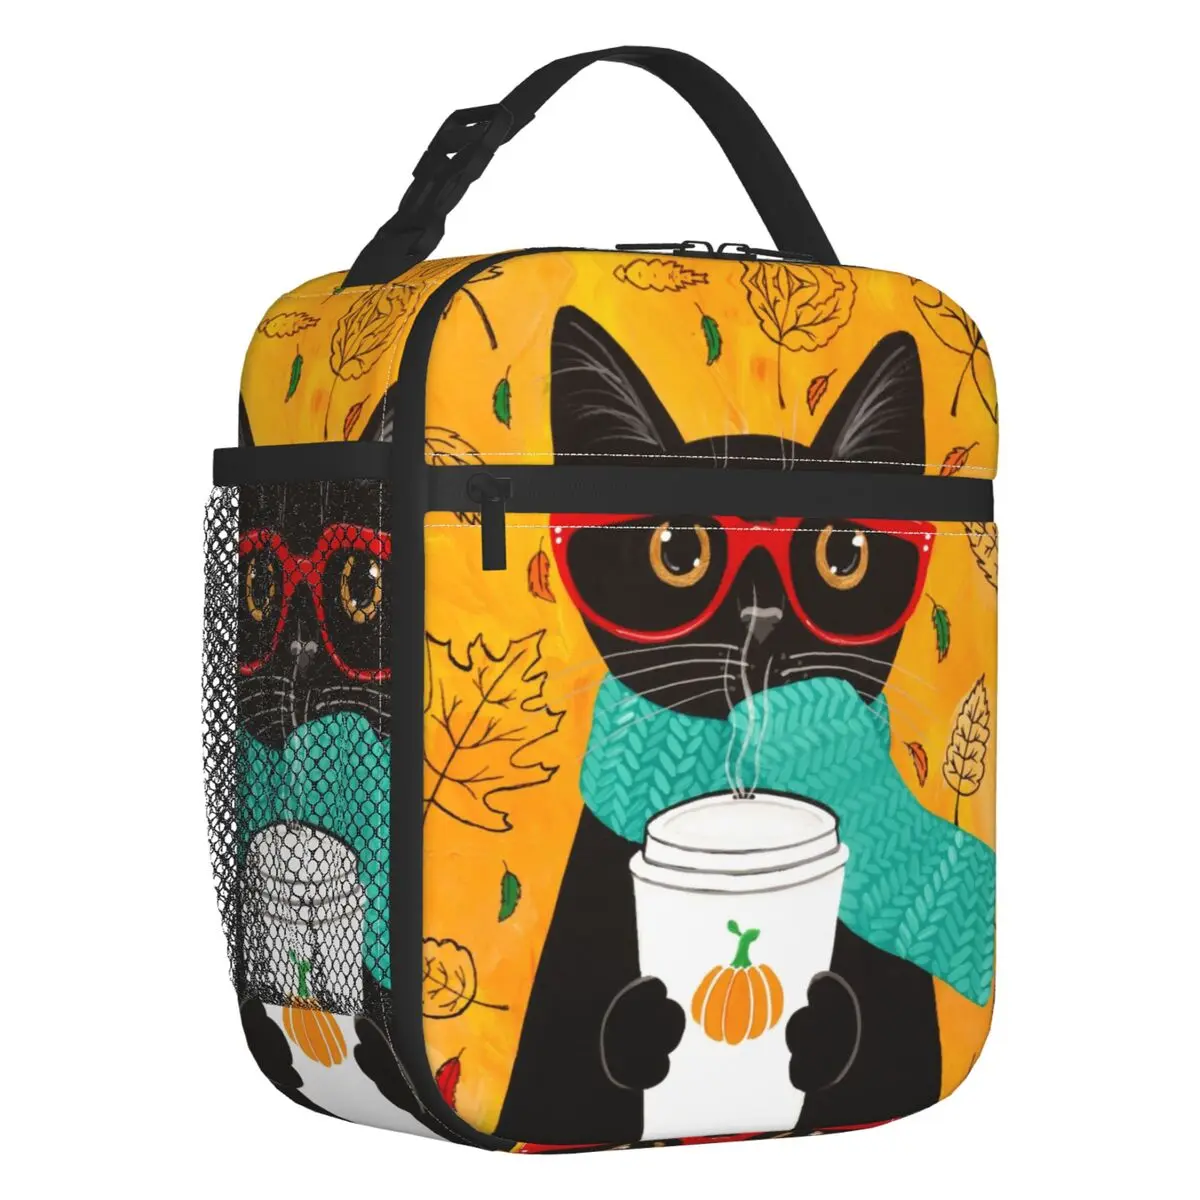 Black Cat Insulated Lunch Bag for Women Leakproof Autumn Pumpkin Coffee Thermal Cooler Lunch Box Office Work School